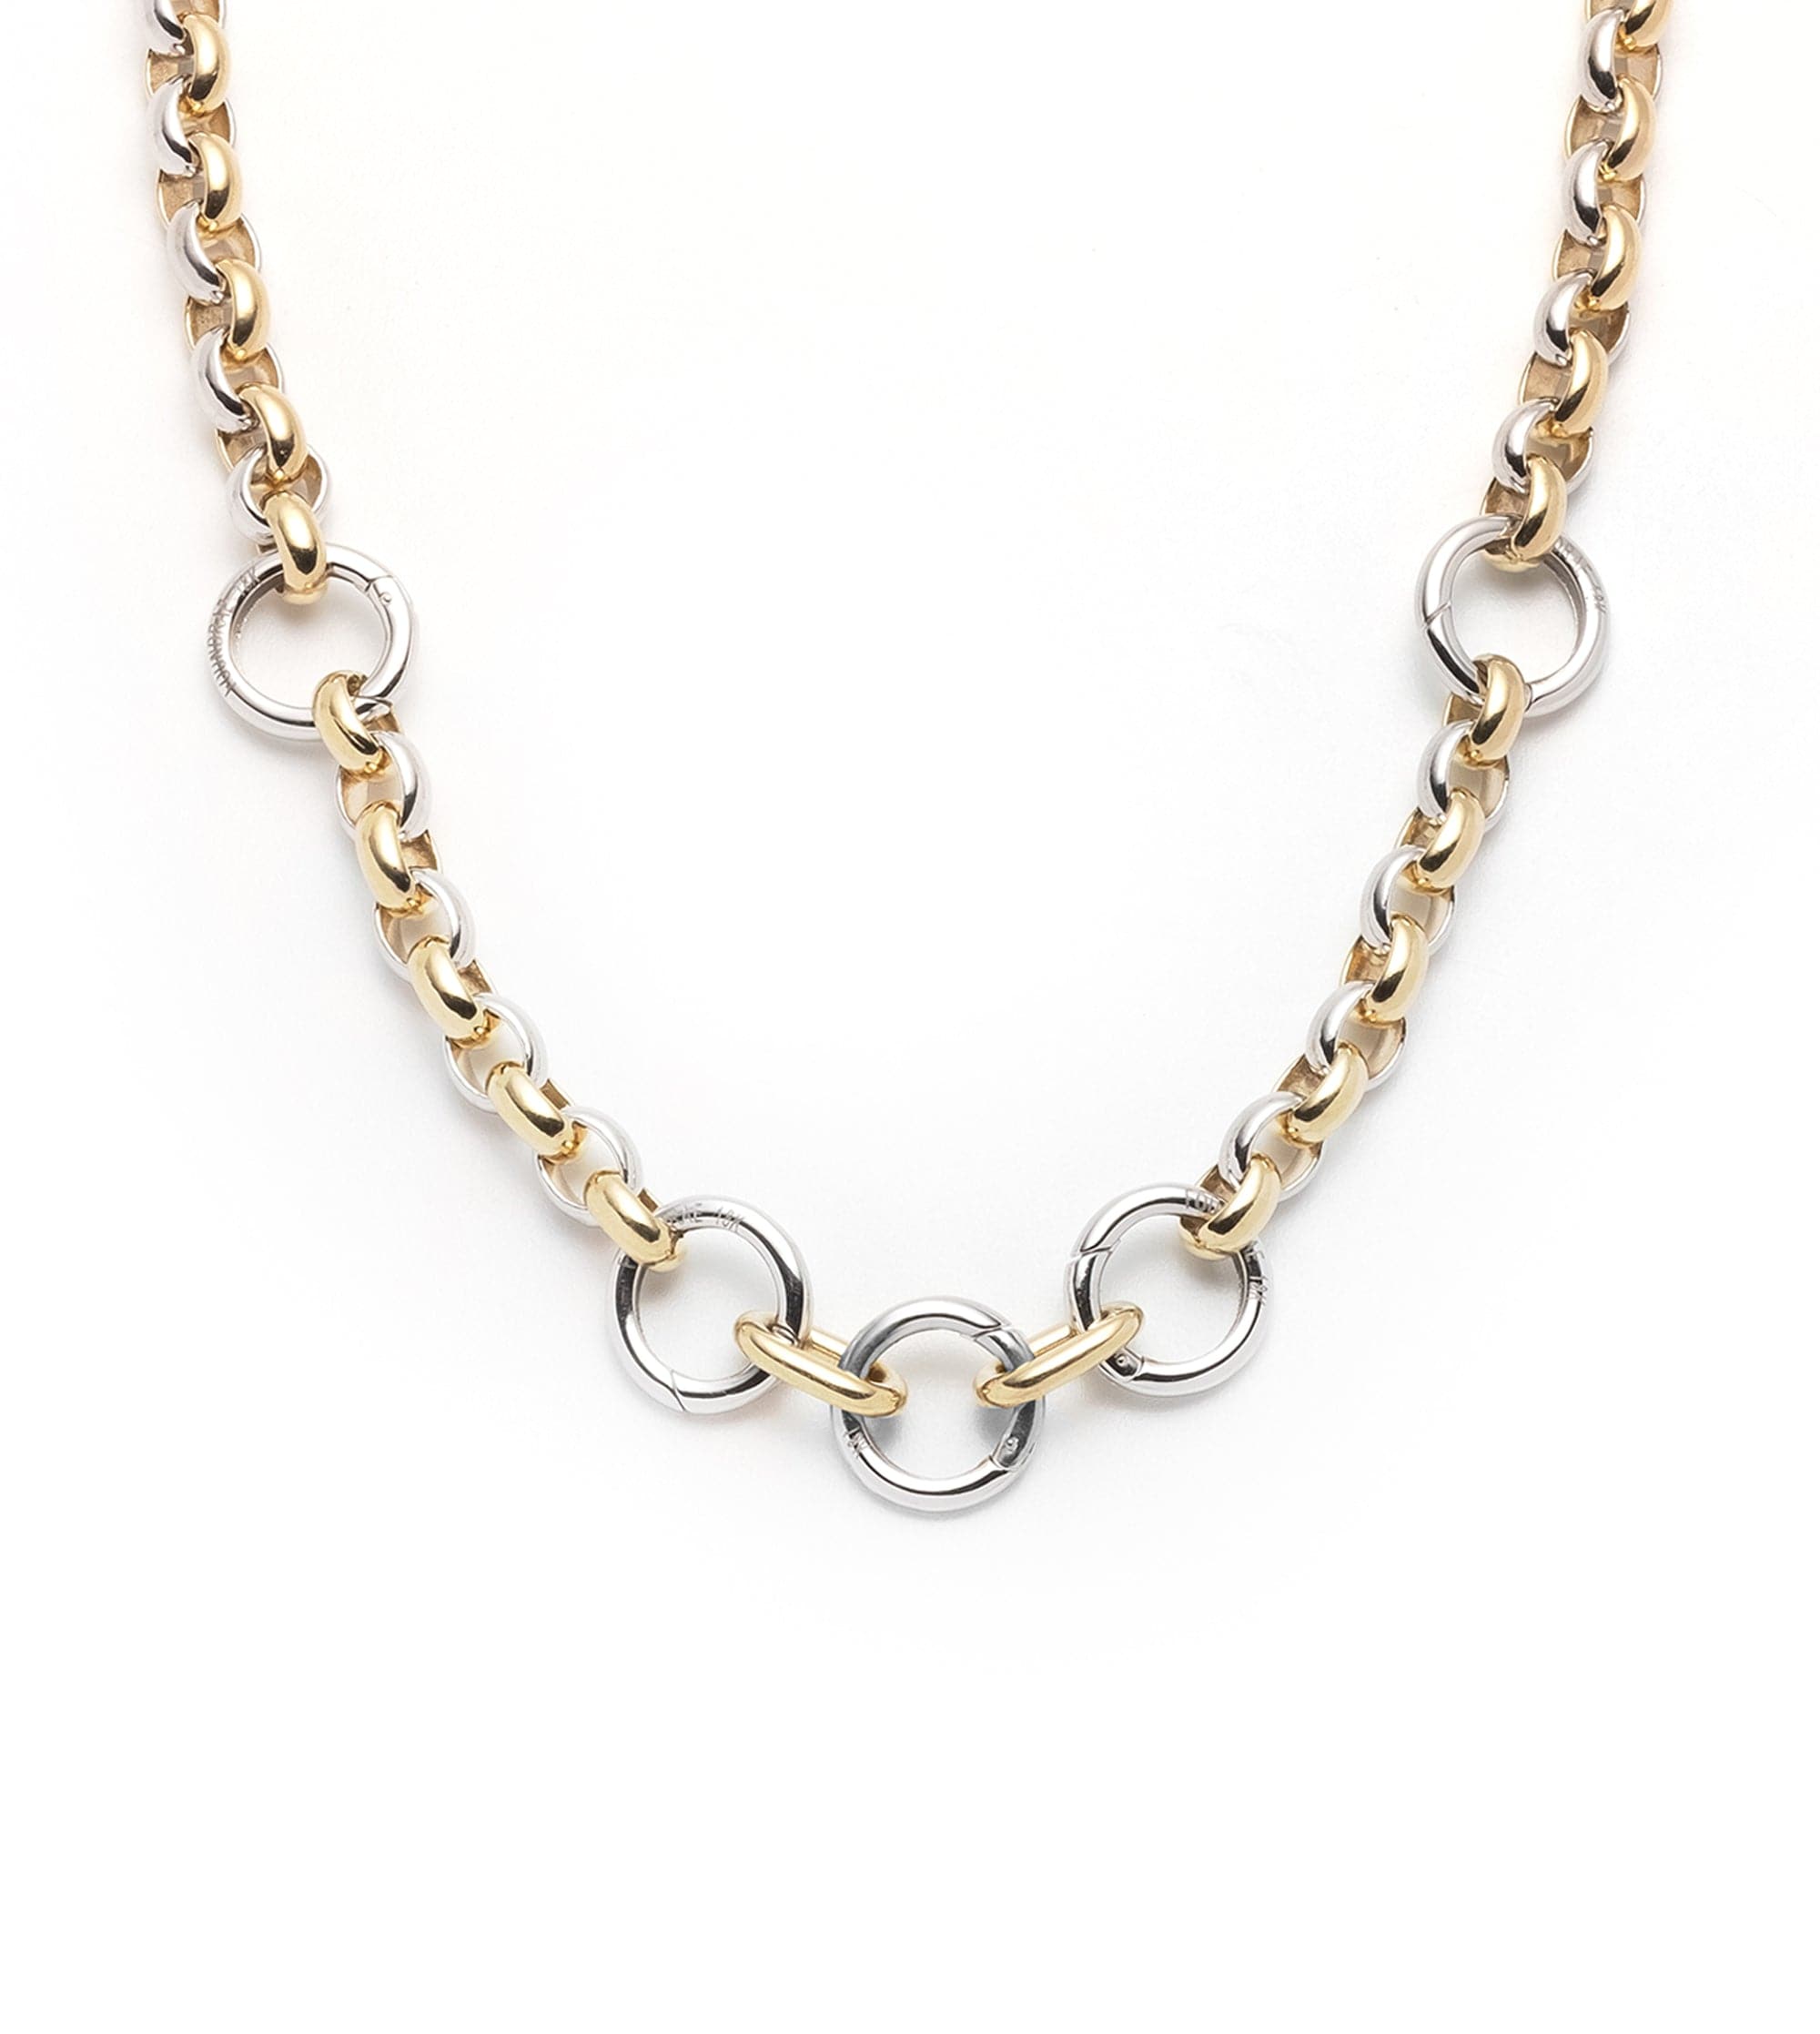 JeenMata Curb Chain Necklace - 18K White Gold Plating over Silver - Gold  Dipped 925 Sterling Silver Chain Necklace for Women - Walmart.com